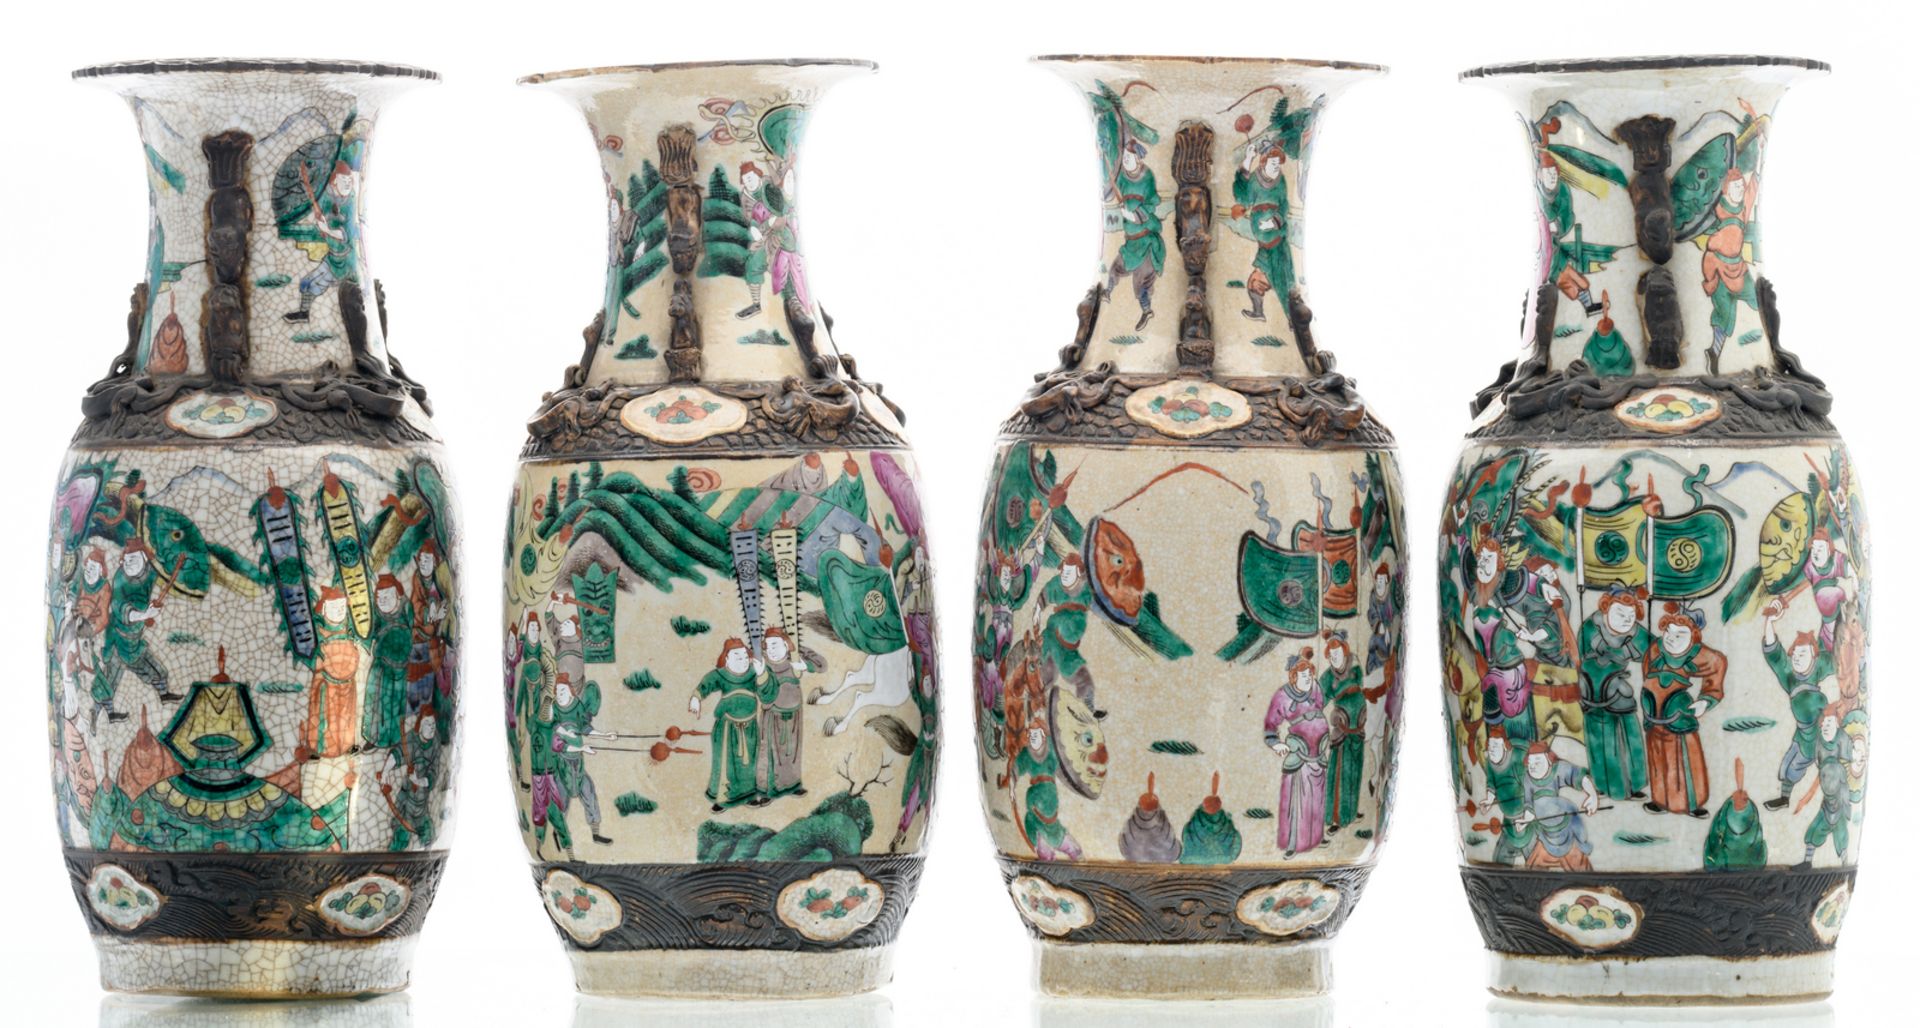 A pair of Chinese polychrome decorated stoneware vases with a battle scene, marked, about 1900; - Image 4 of 8